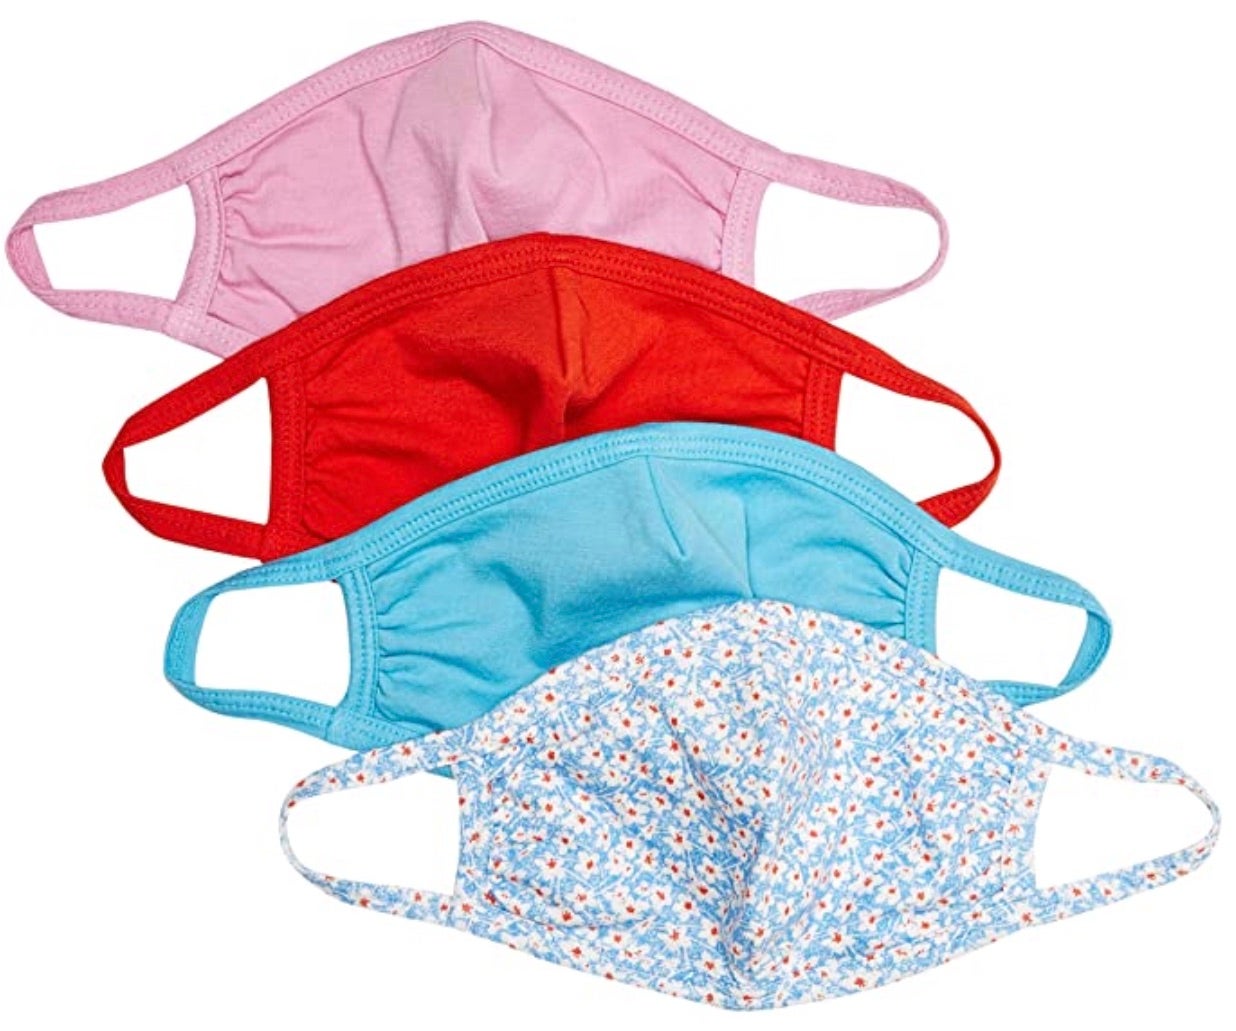 https://www.etonline.com/sites/default/files/images/2020-05/quality_durables_adults_and_kids_4-pack_reusable_face_covering_.jpg